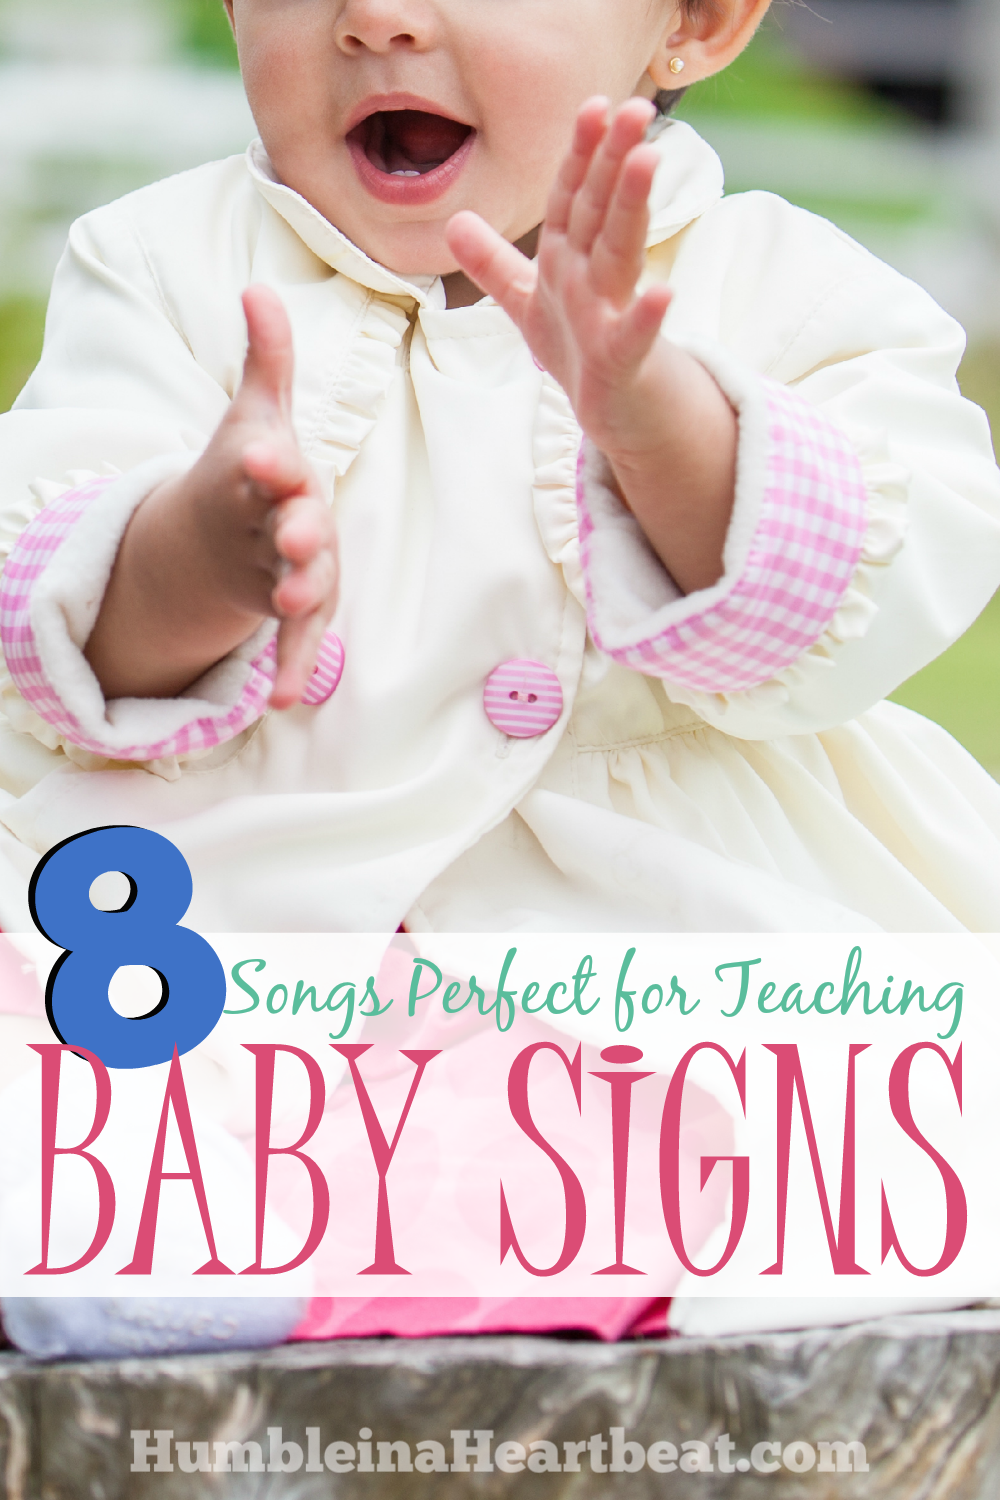 You can turn pretty much any song into an action song by using some baby sign language. Your child will love to sing these 8 songs that are perfect for teaching baby signs!